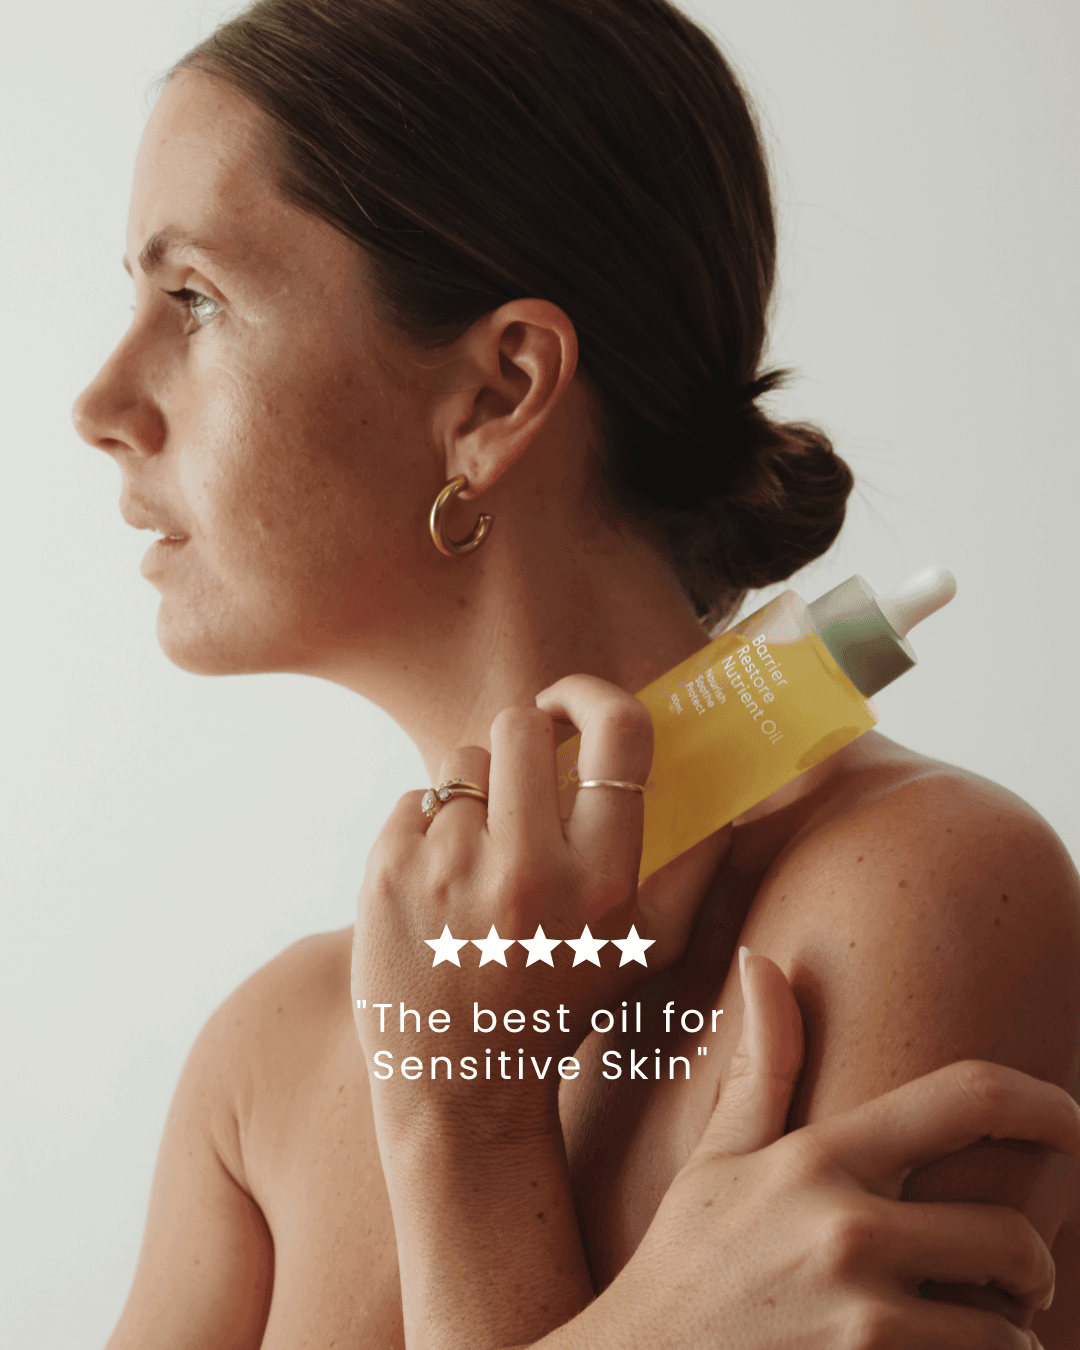 Barrier Restore Nutrient Oil being held by a woman with a 5 star review in the foreground